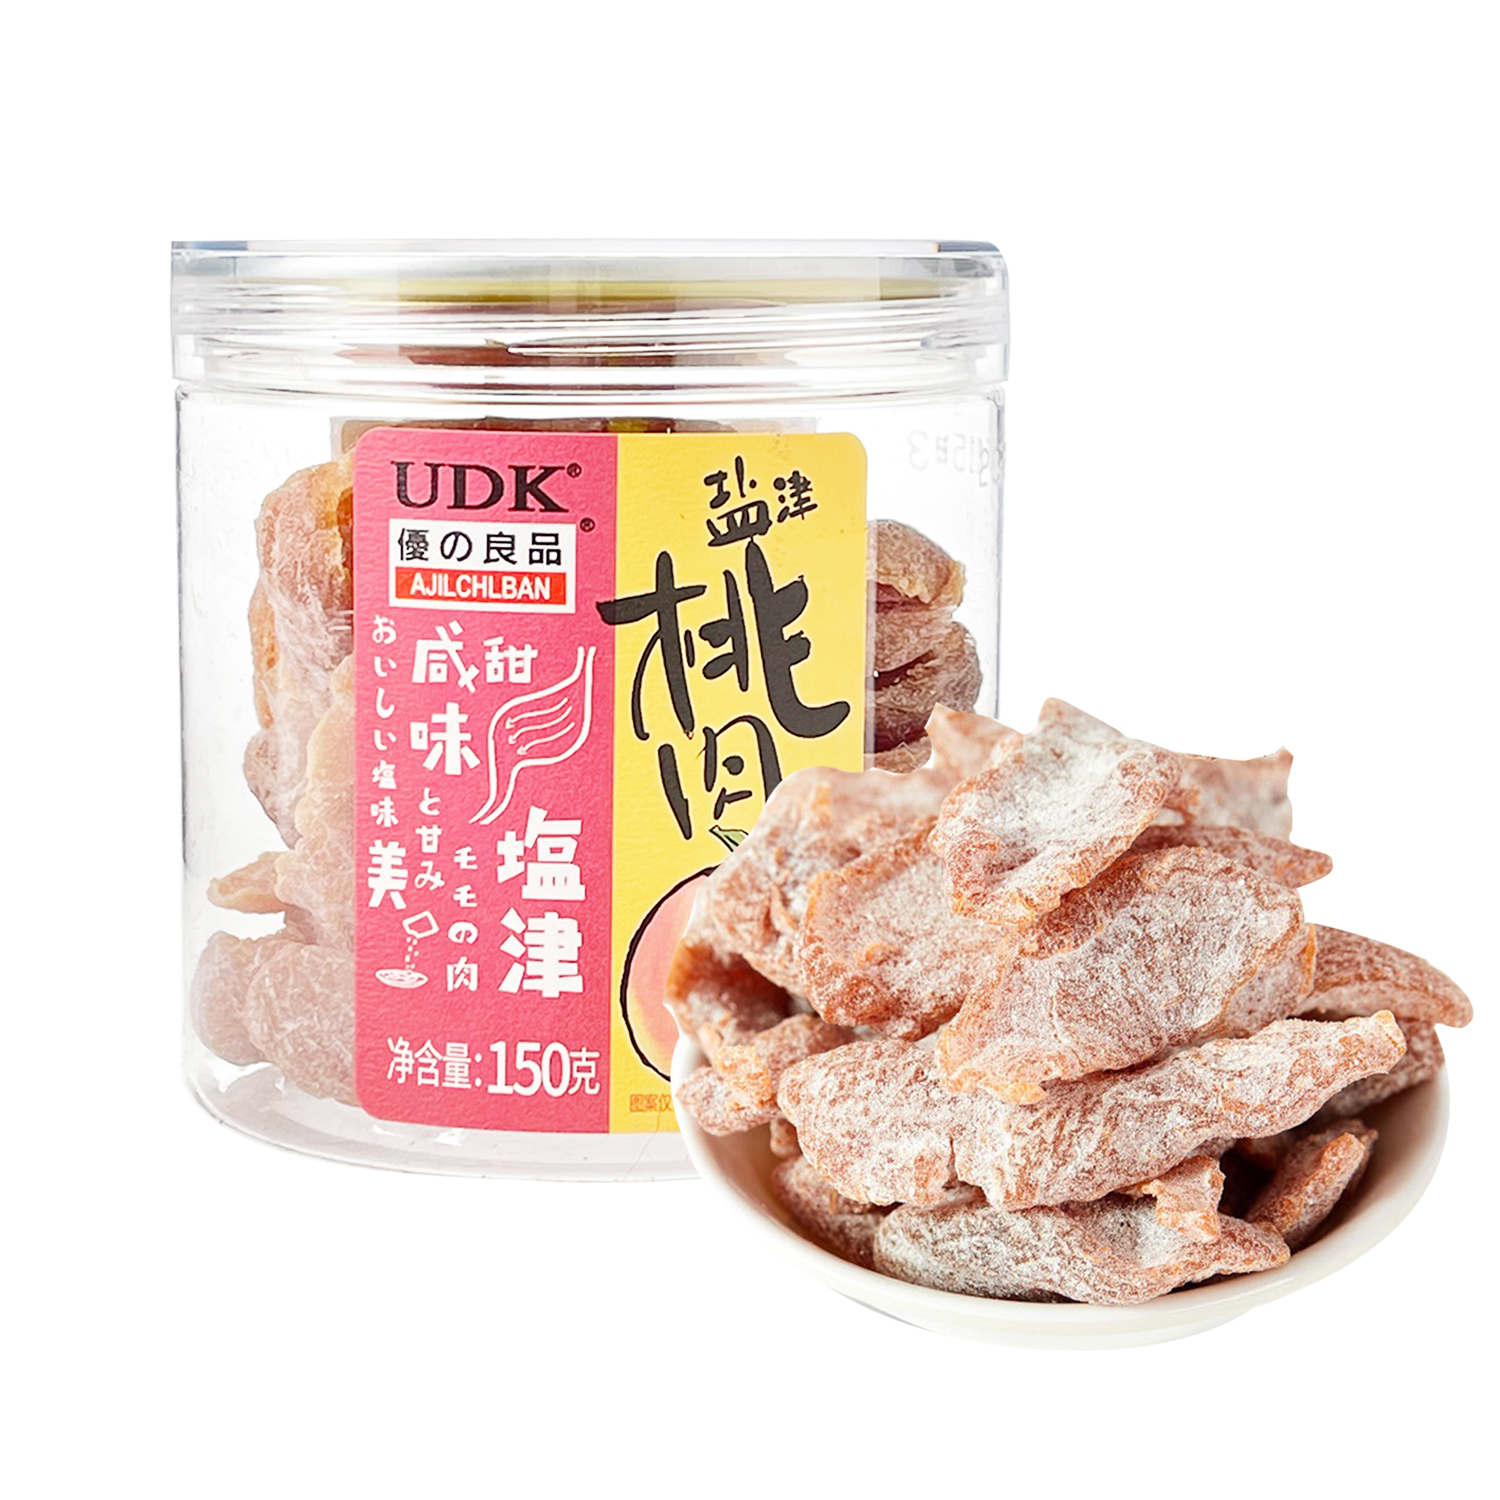 Aji Ichiban Preserved Peach Meat 150g-eBest-Nuts & Dried Fruit,Snacks & Confectionery